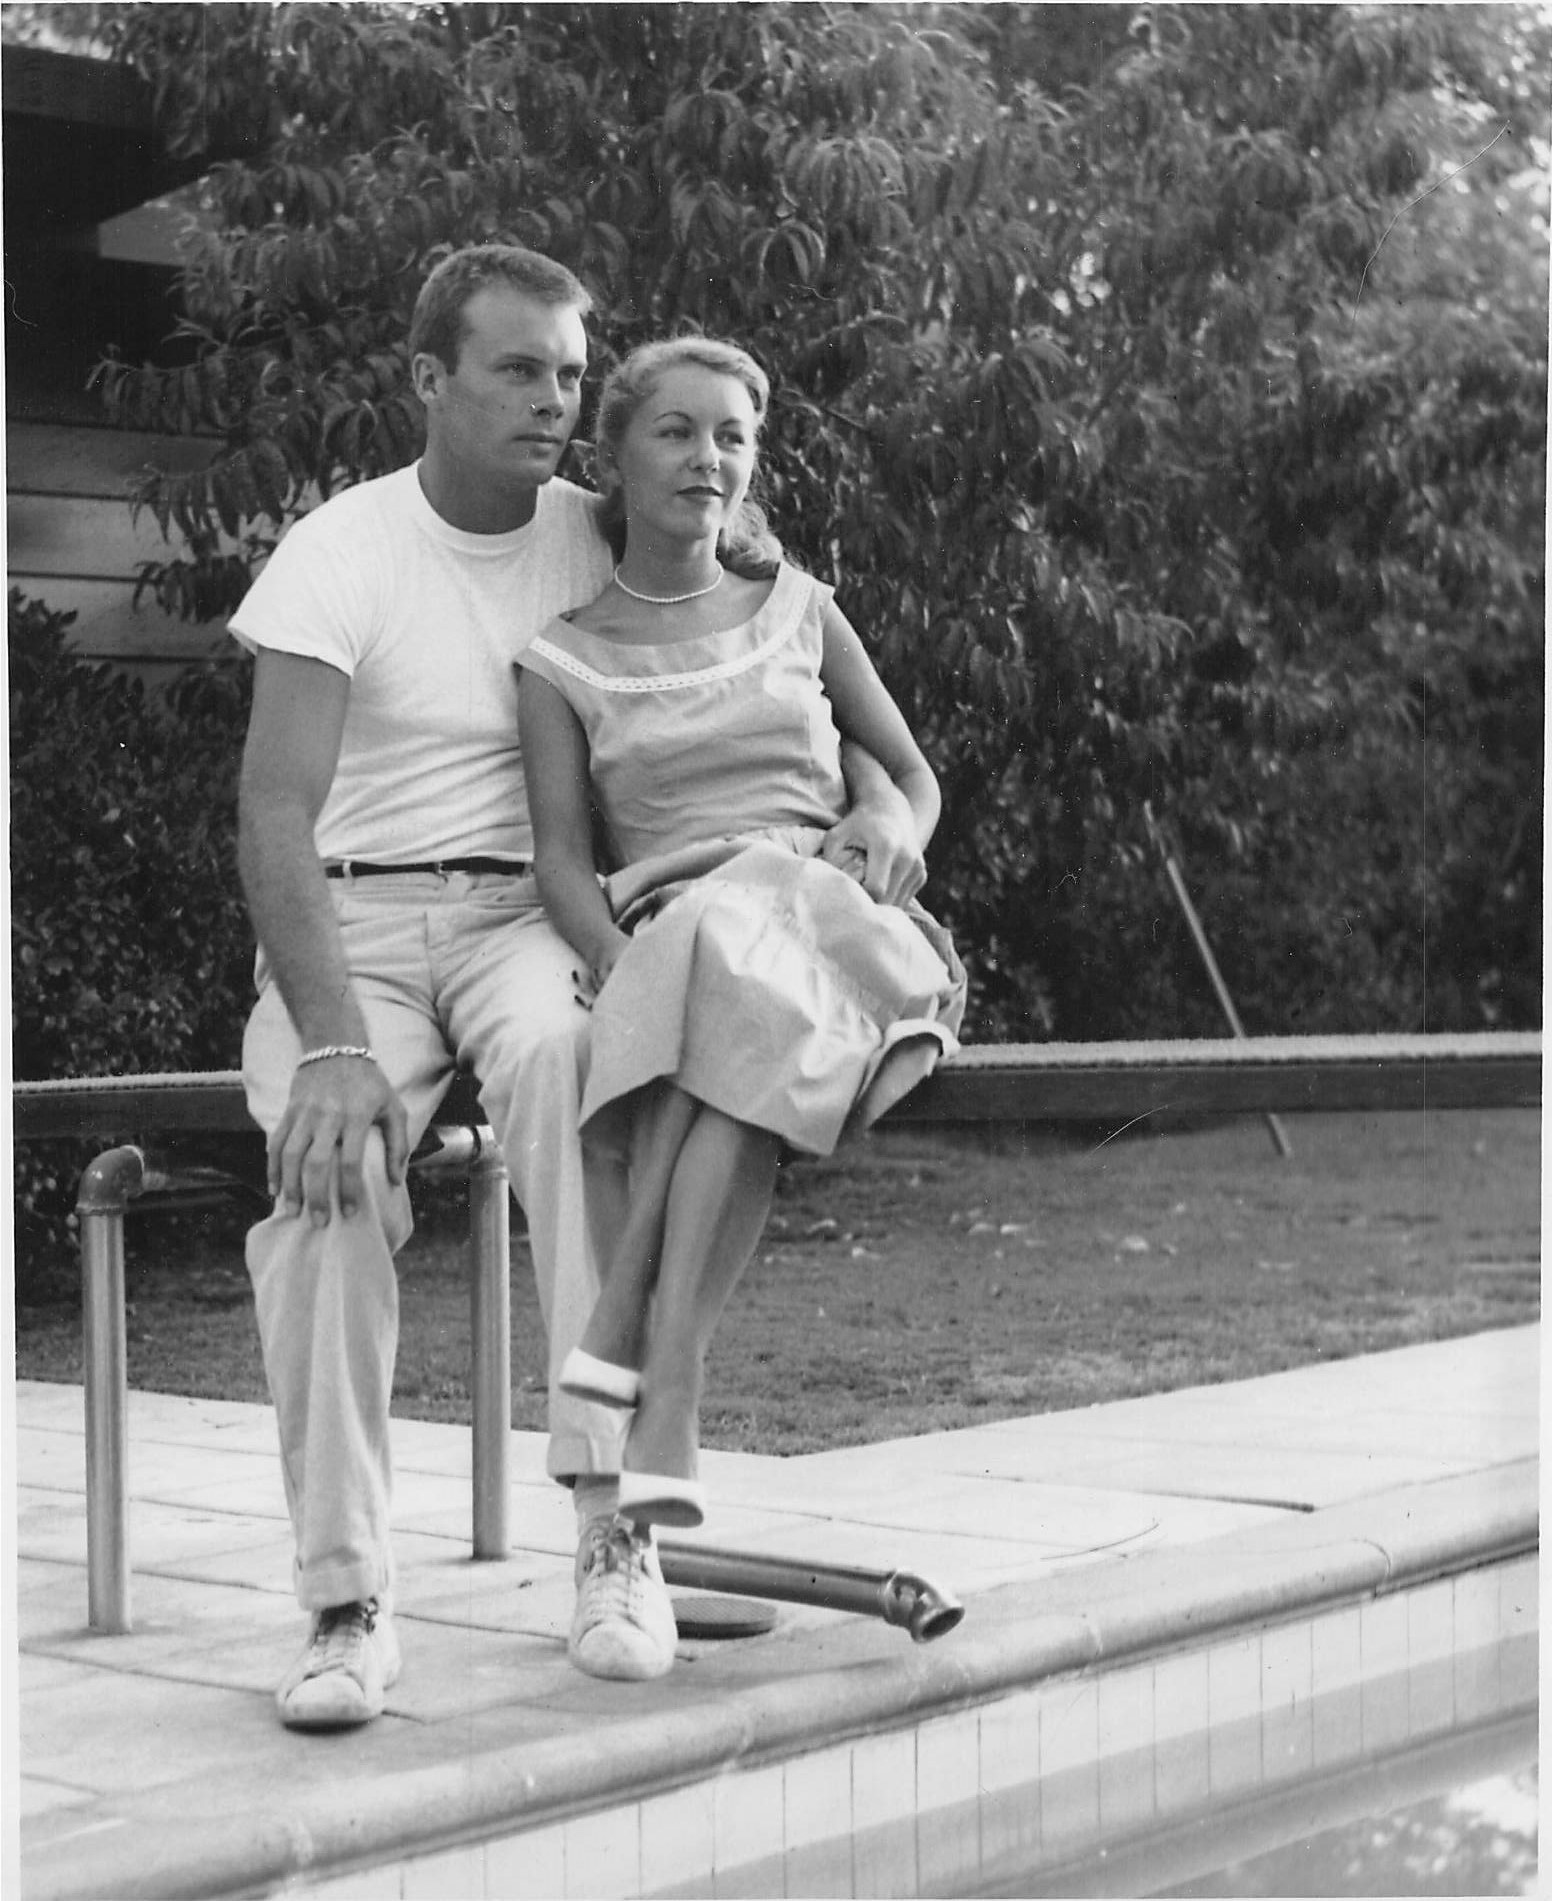  Bob and Dorothy Ross, c. 1953  This photo and the next one seem to be professional photographs, perhaps taken by someone at Columbia Pictures. Location unknown. Their chance meeting following a car accident, c. 1951-1952, developed into a serious ro